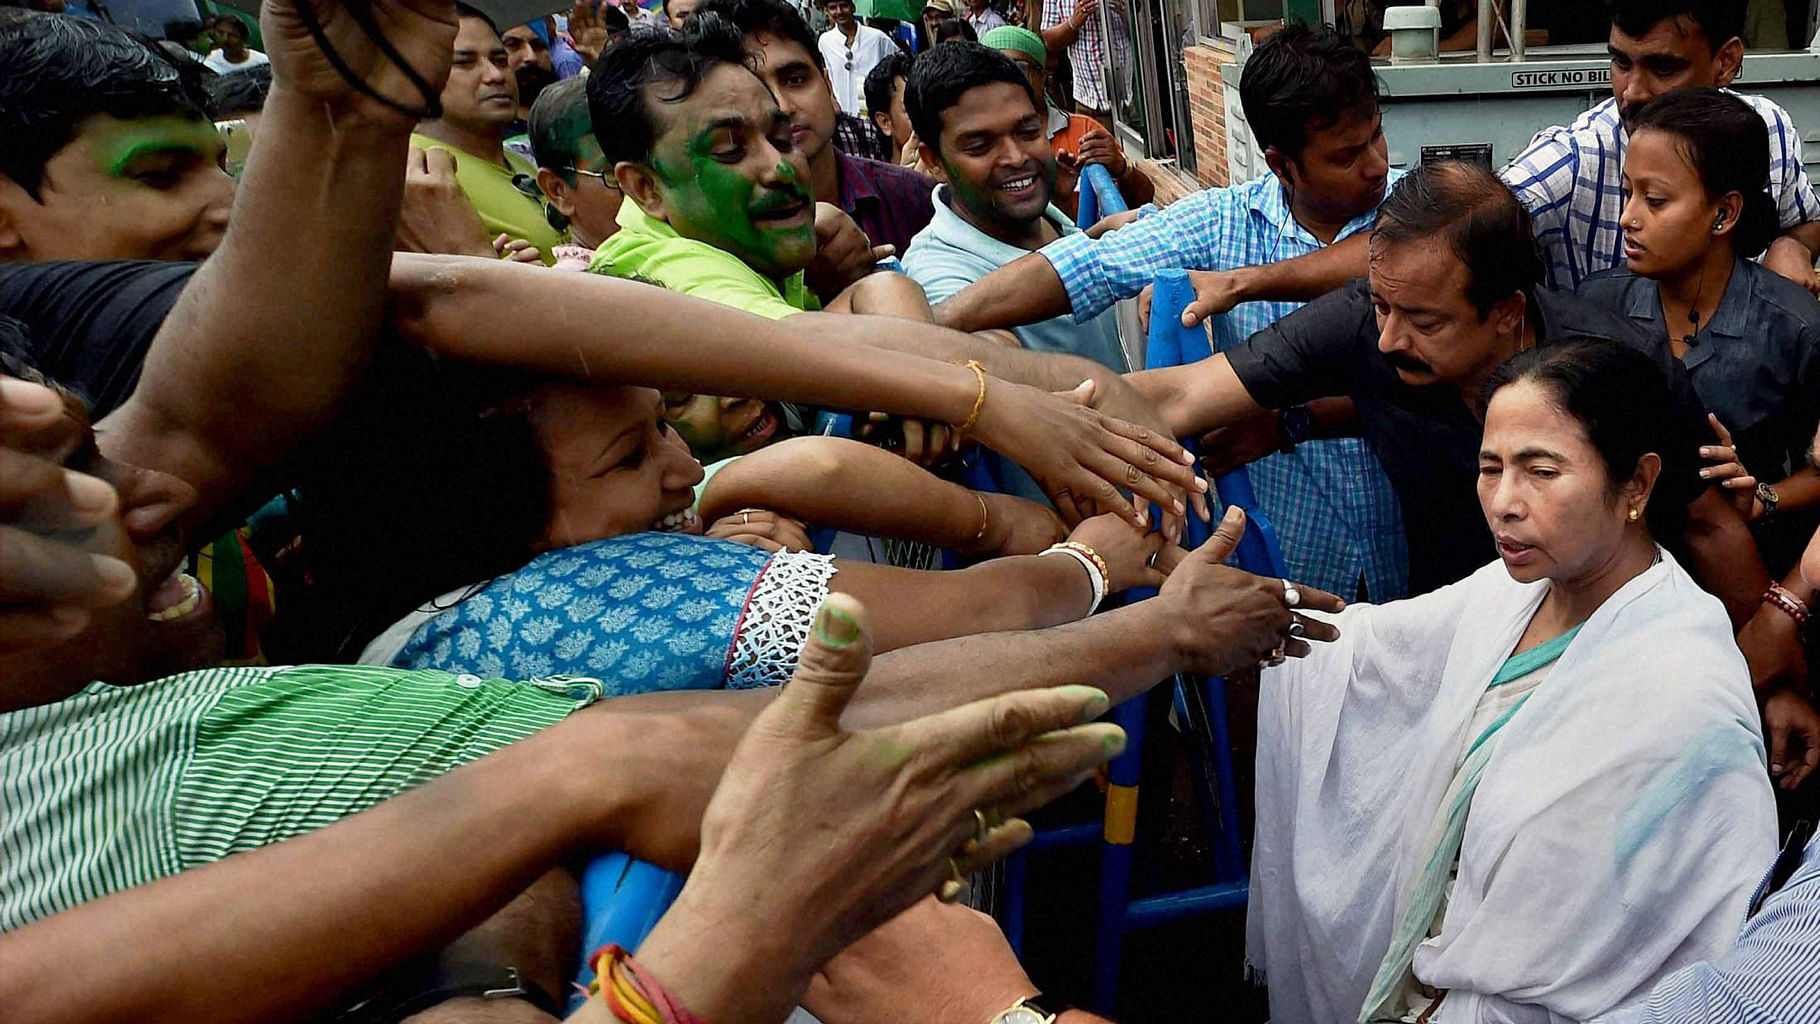 West Bengal CM Mamata Banerjee shaking hands with supporters after her party’s thumping win in West Bengal Assembly elections, in Kolkata on Thursday. (Photo : PTI)